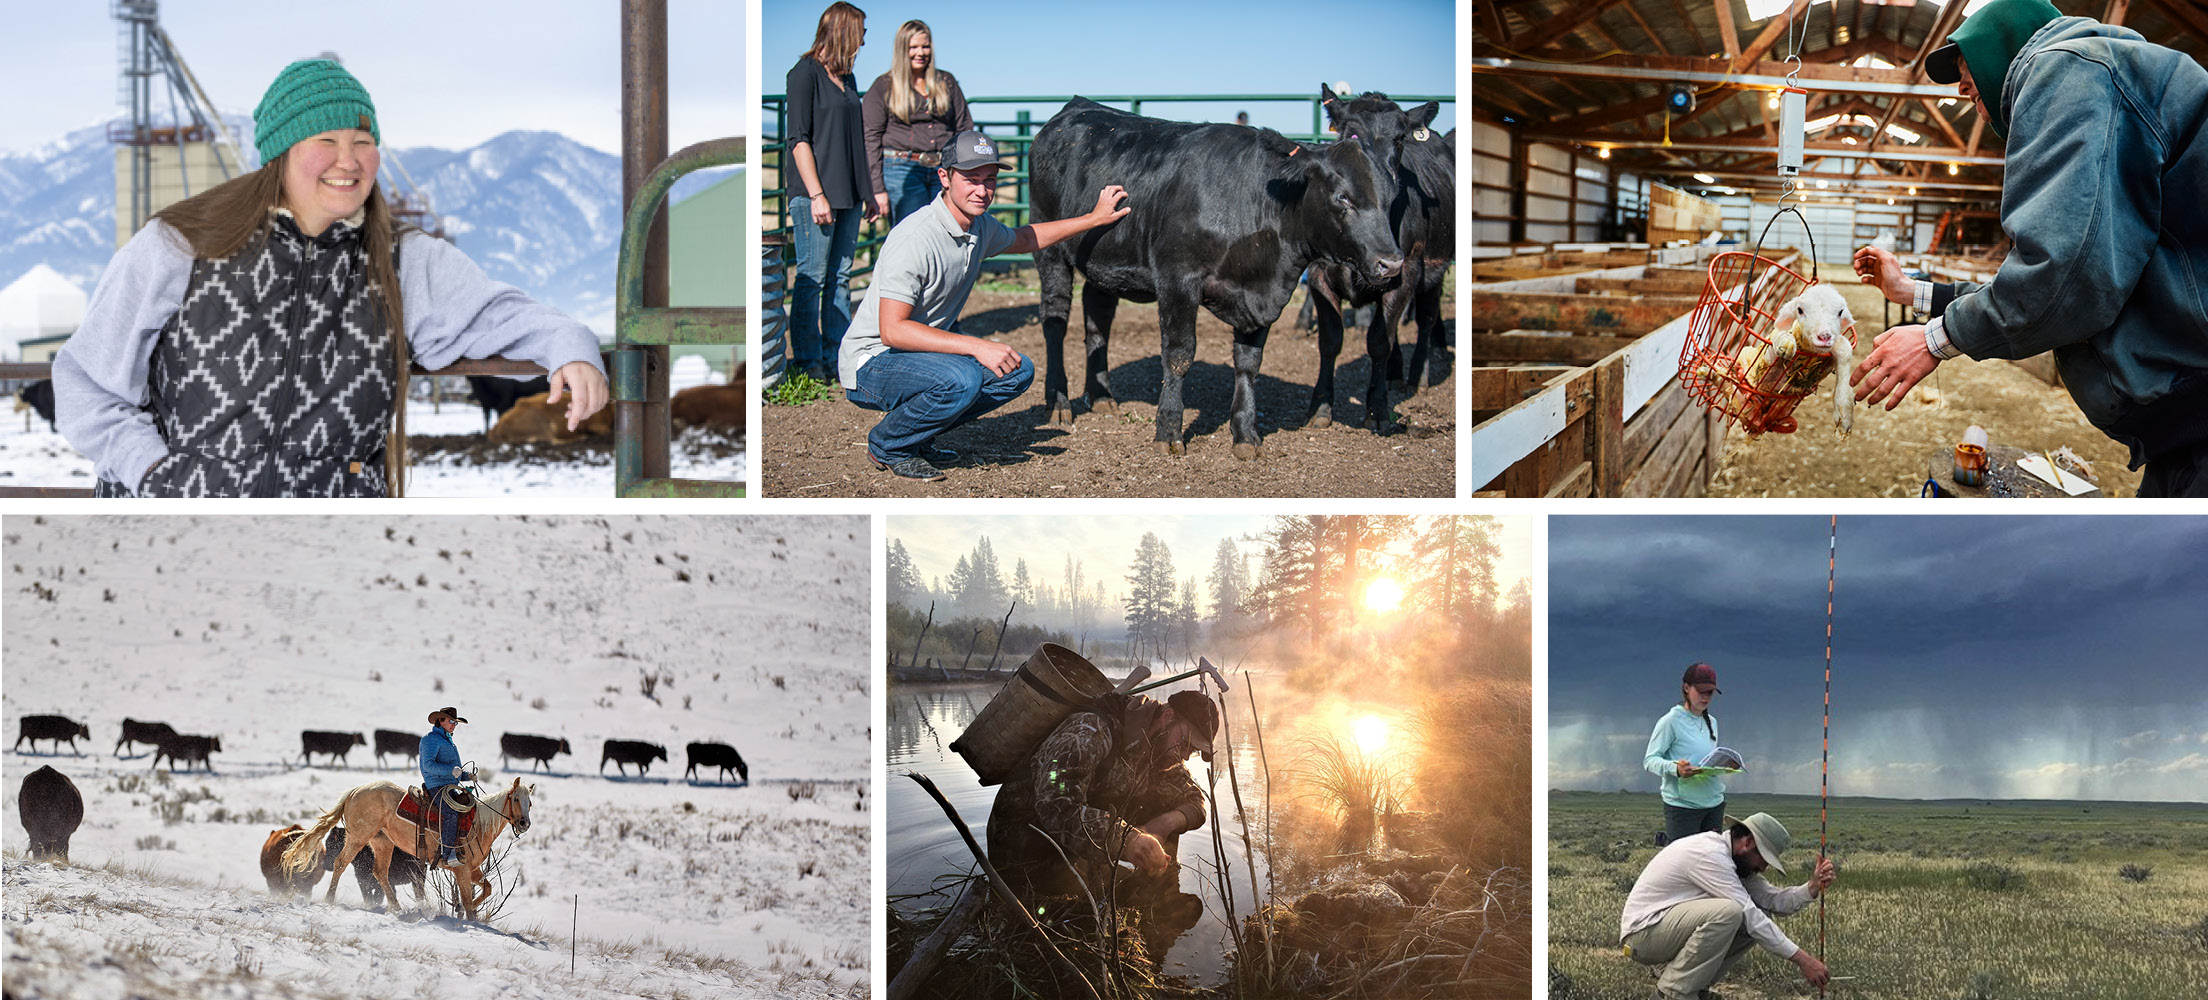 top, from left: woman with a green beanie, students in a dry lot with black Angus cattle, student in a hoodie weighing a lamb. Bottom from left: Male student on horseback in a snowy cattle pasture, male student camouflage in a swampy area trapping beaver, female and male student on the range measuring grasses under a stormy sky